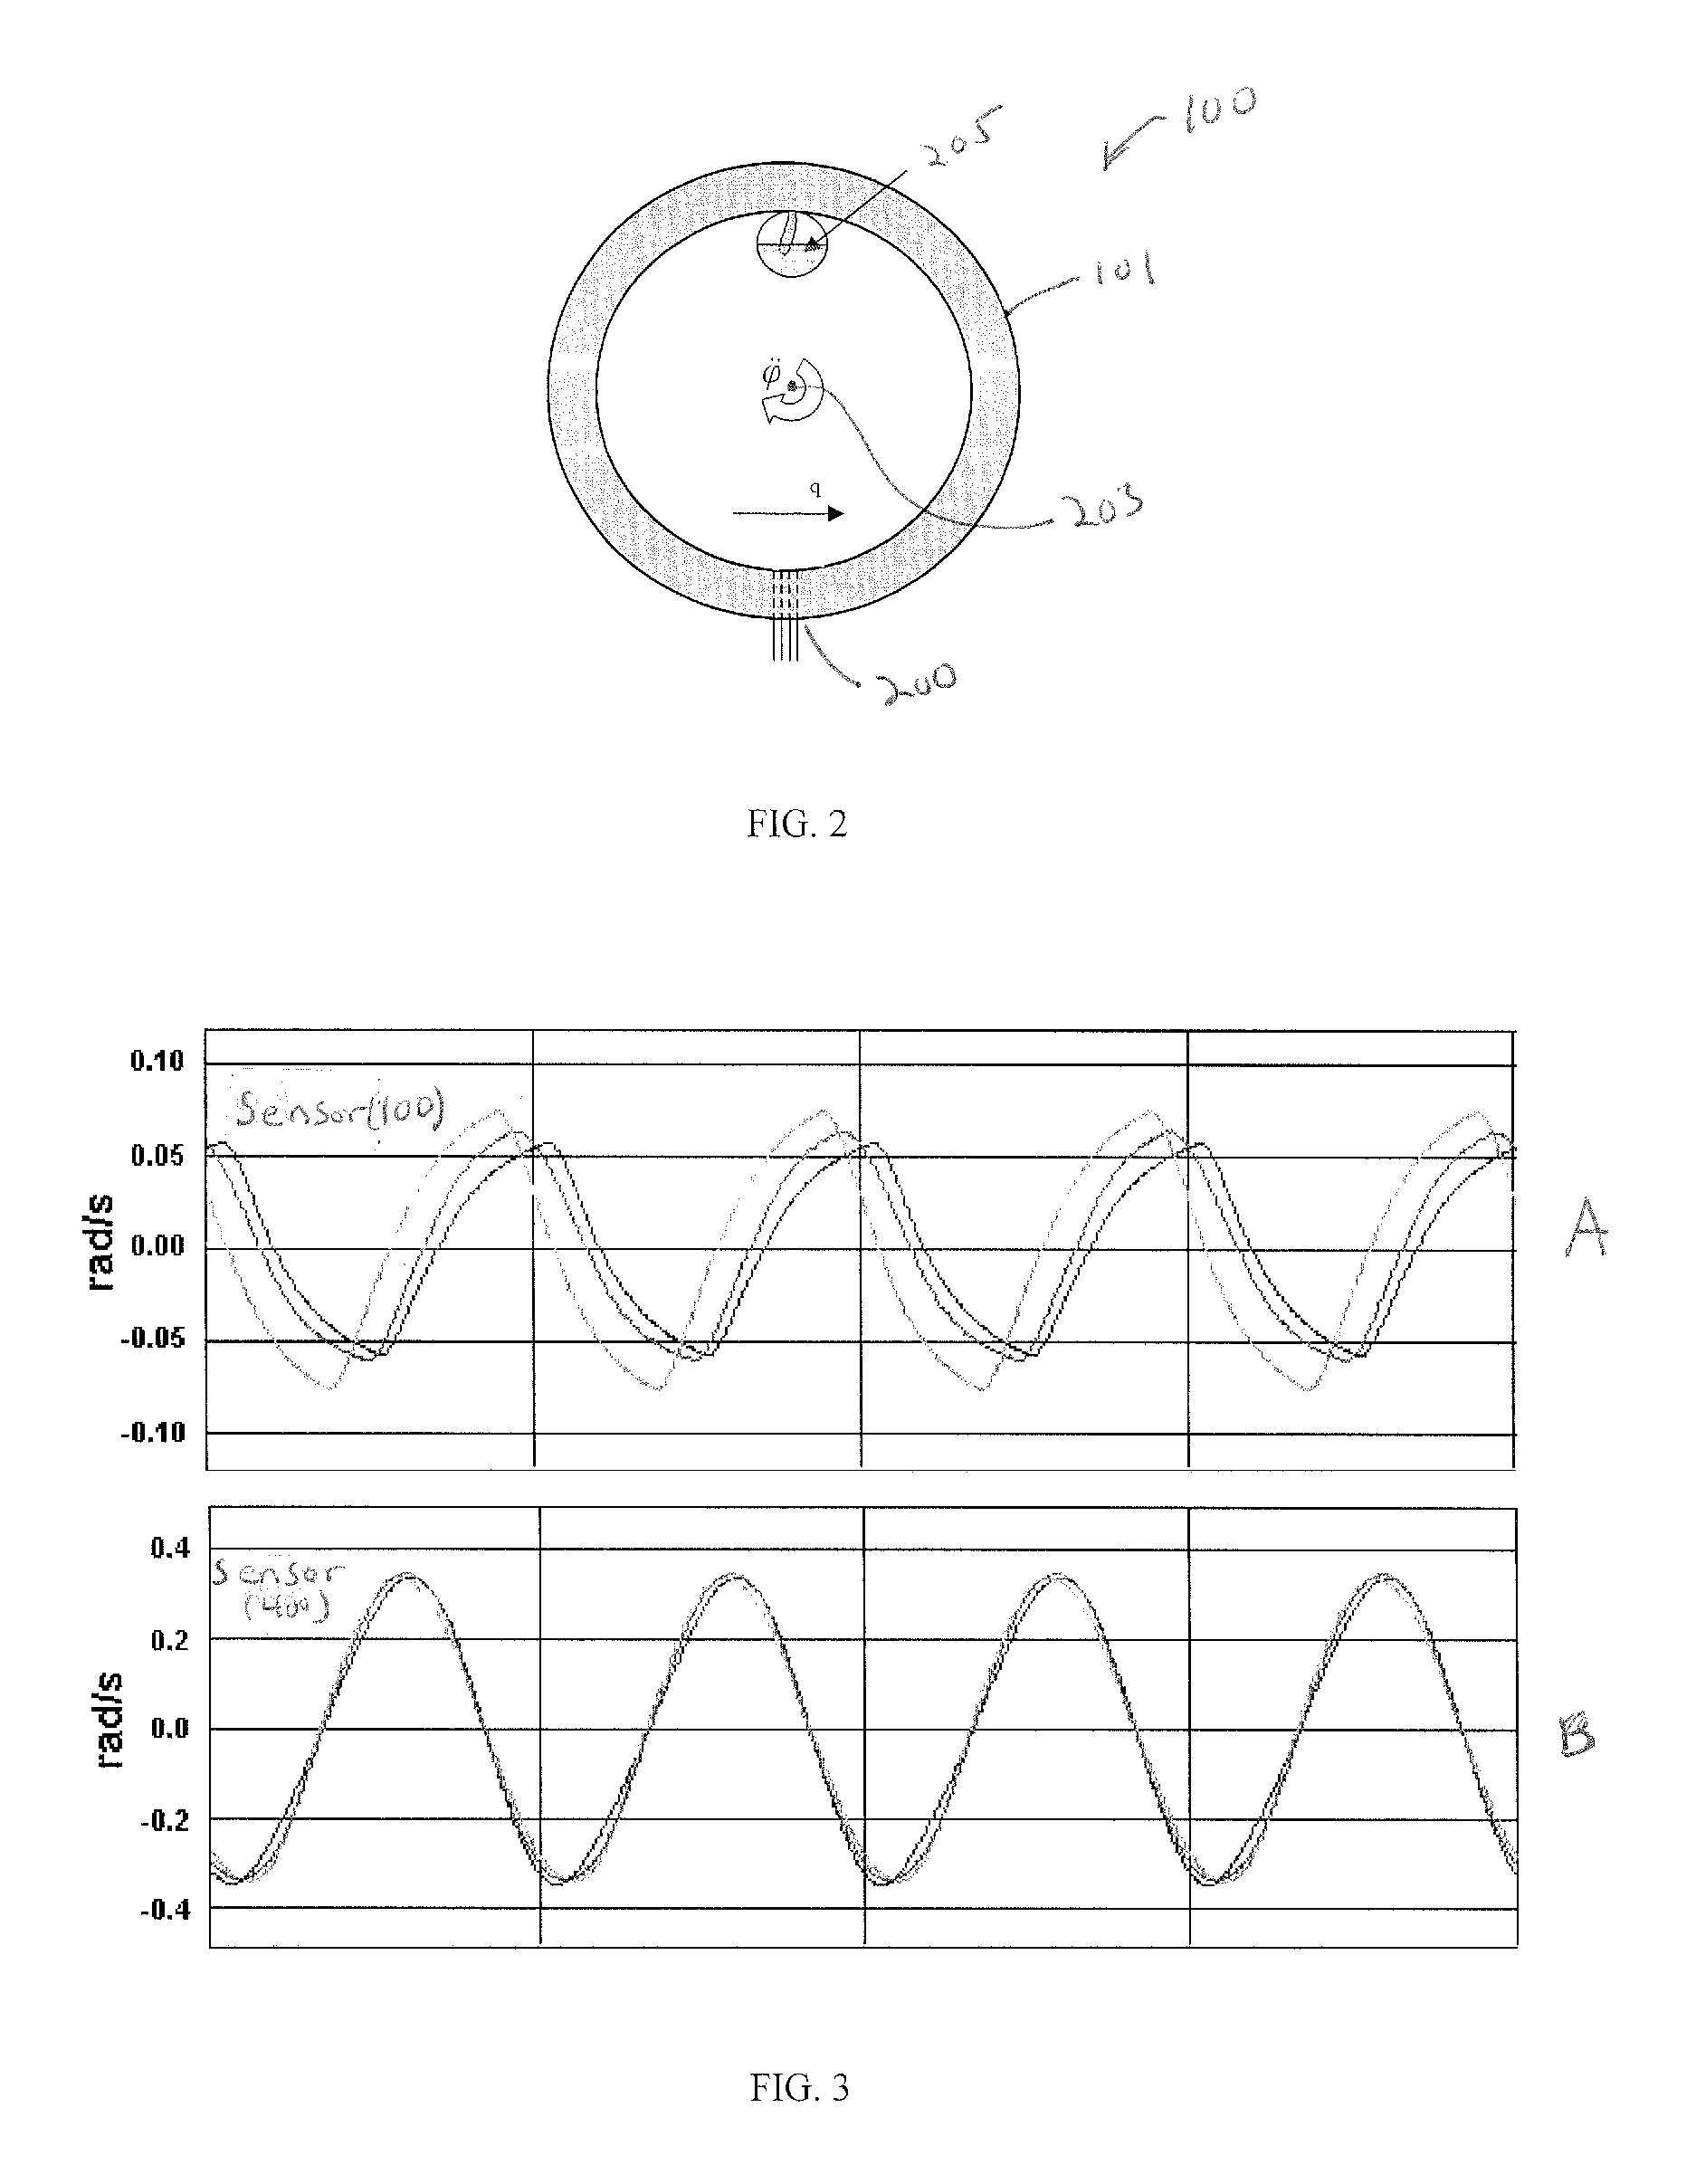 Rotational electrochemical seismometer using magnetohydrodynamic technology and related methods